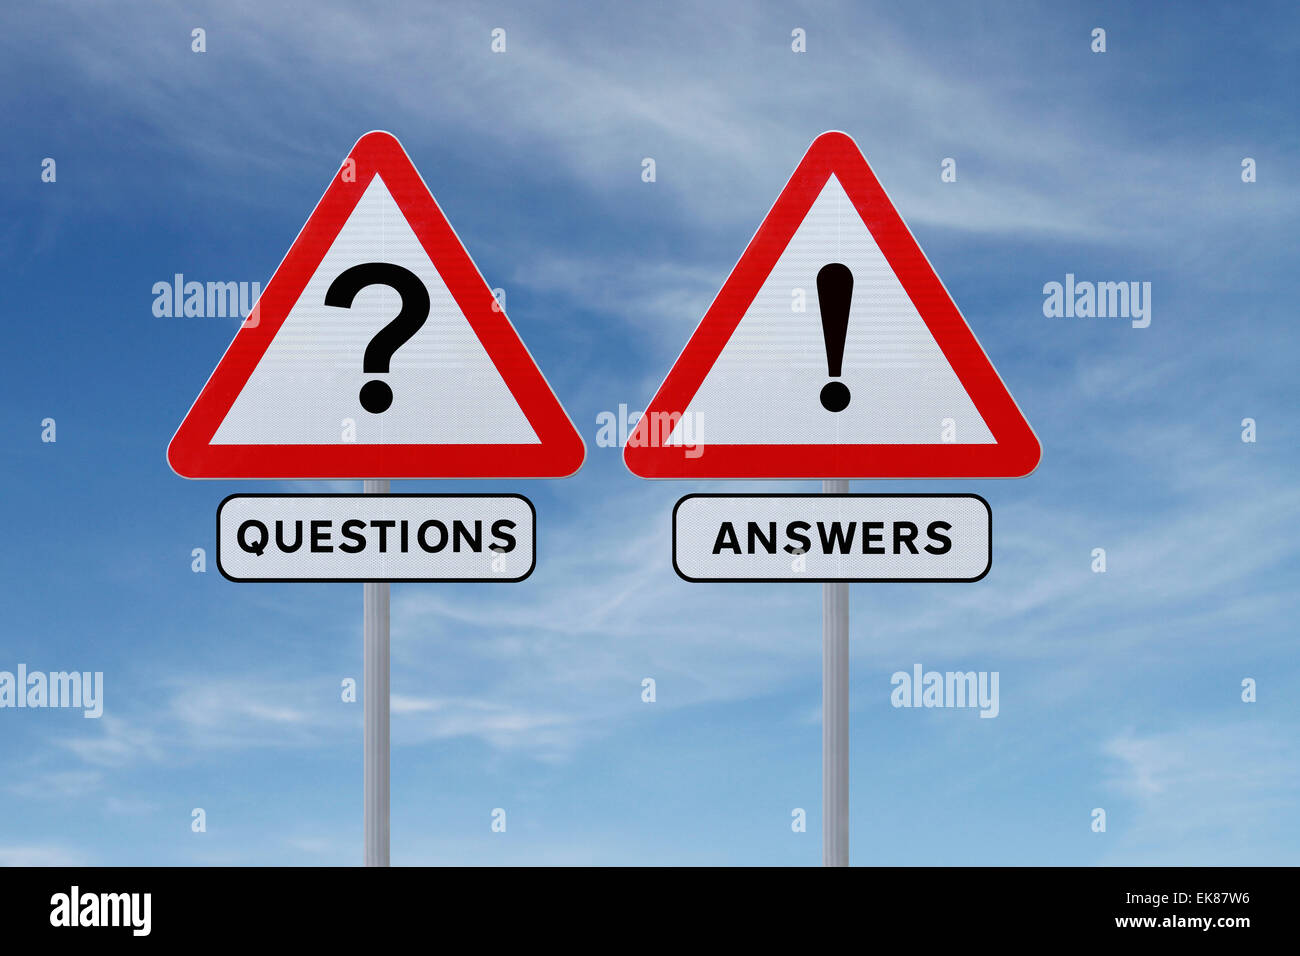 Questions And Answers Stock Photo